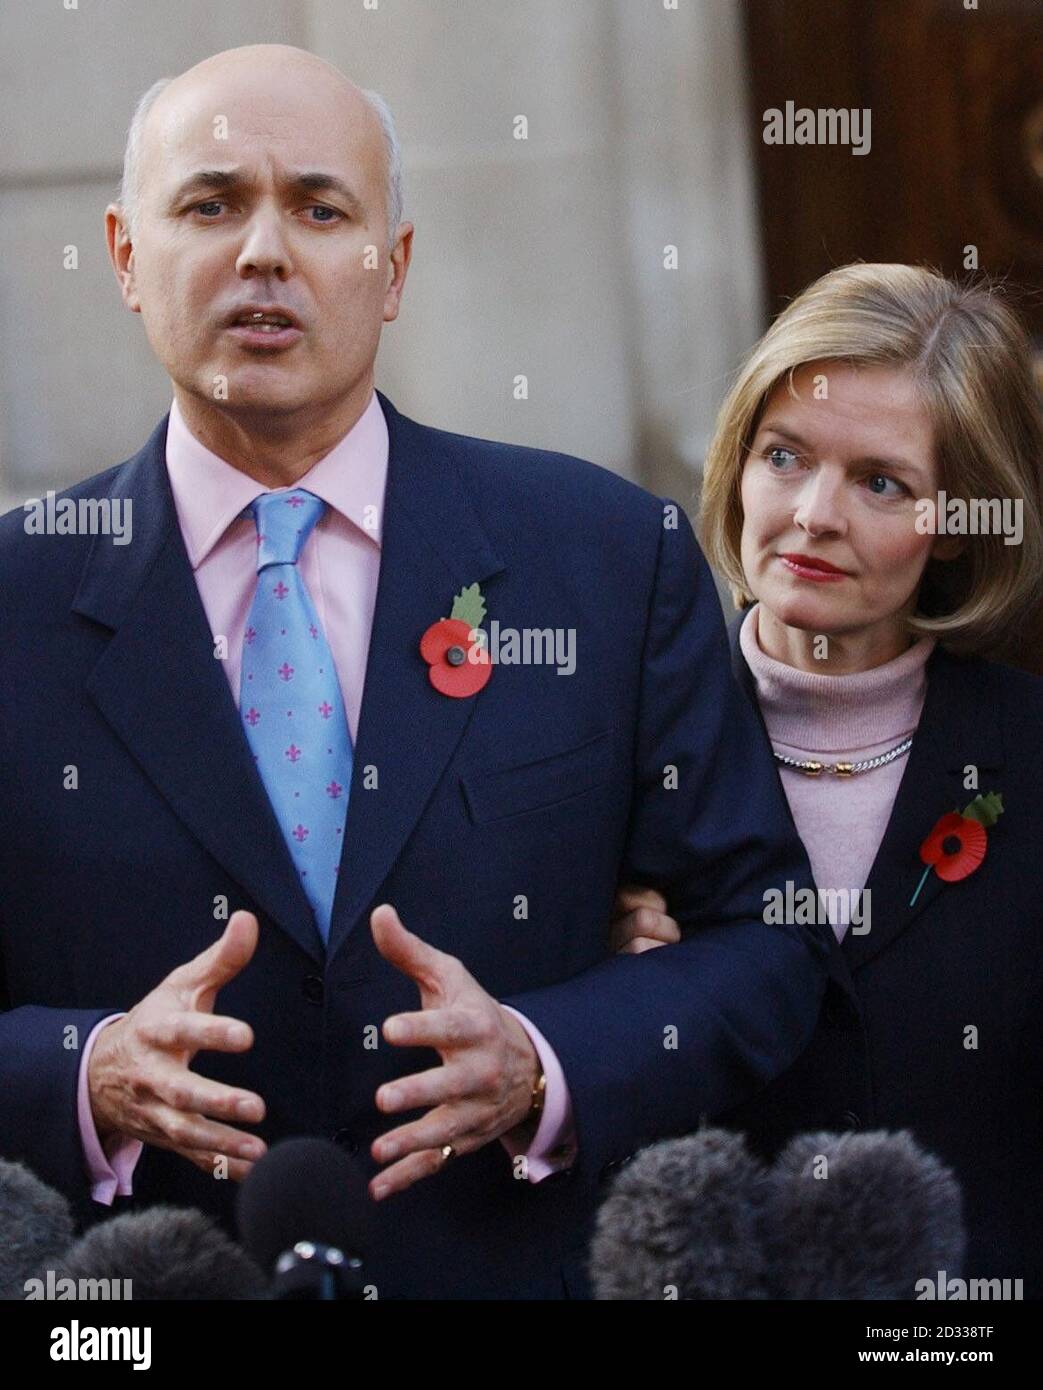 Iain Duncan Smith talks to journalists, with his wife, Betsy, at his side, outside the Conservative Central Office in London after 25 MPs wrote to Sir Michael Spicer, chair of the 1922 Committee of backbenchers, demanding a vote of confidence in him as leader.  Mr Duncan Smith told journalists he welcomed the opportunity to win a 'renewed mandate' to lead the party to the next election.   Stock Photo